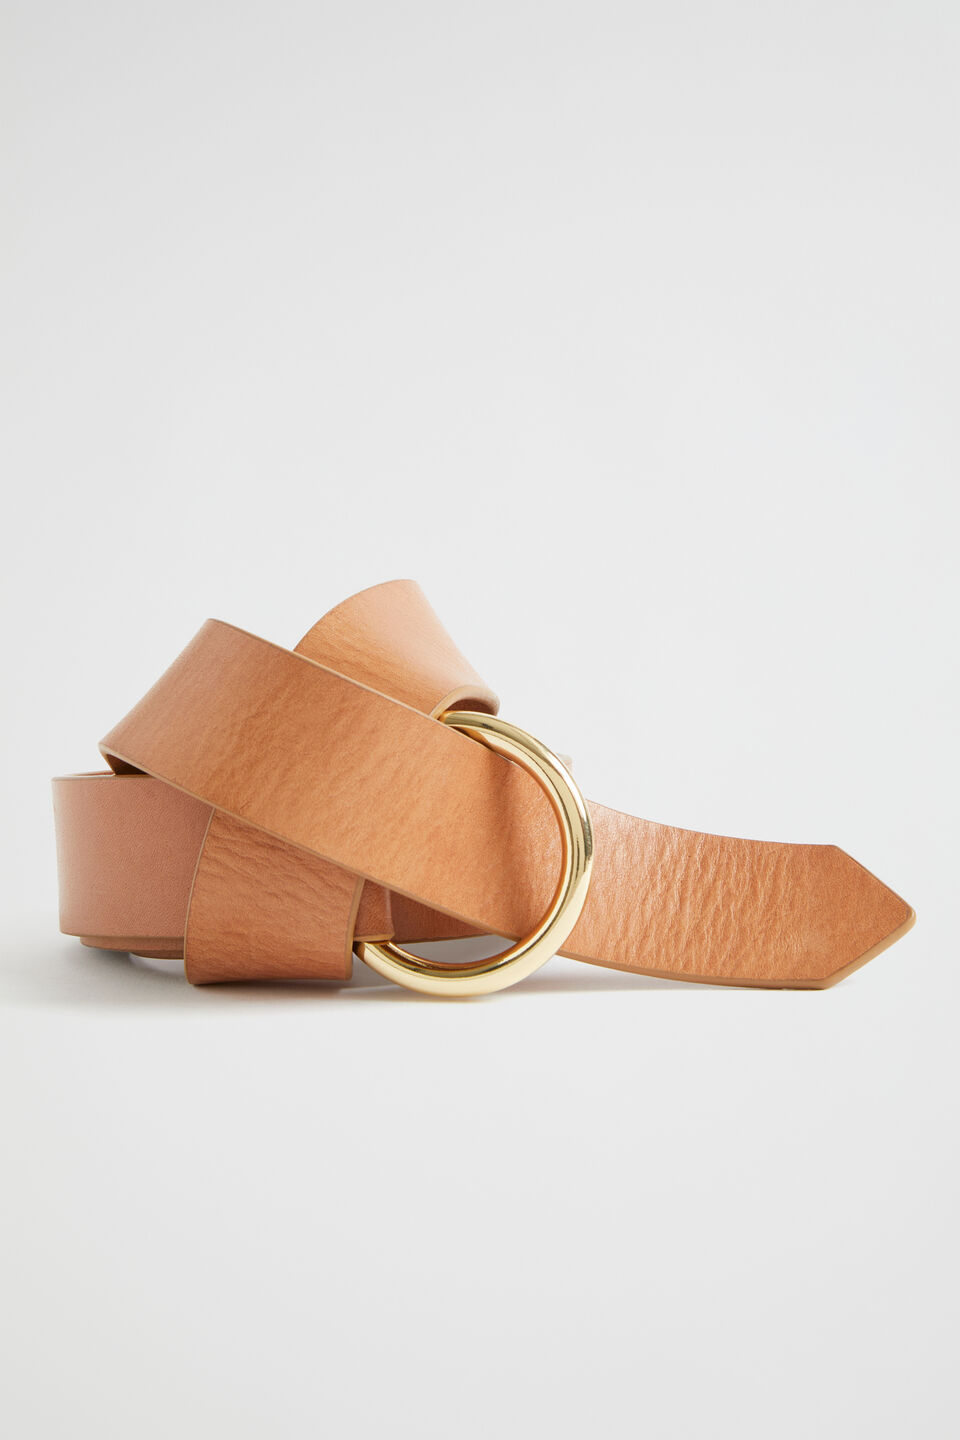 Ava Leather Ring Belt  Toffee